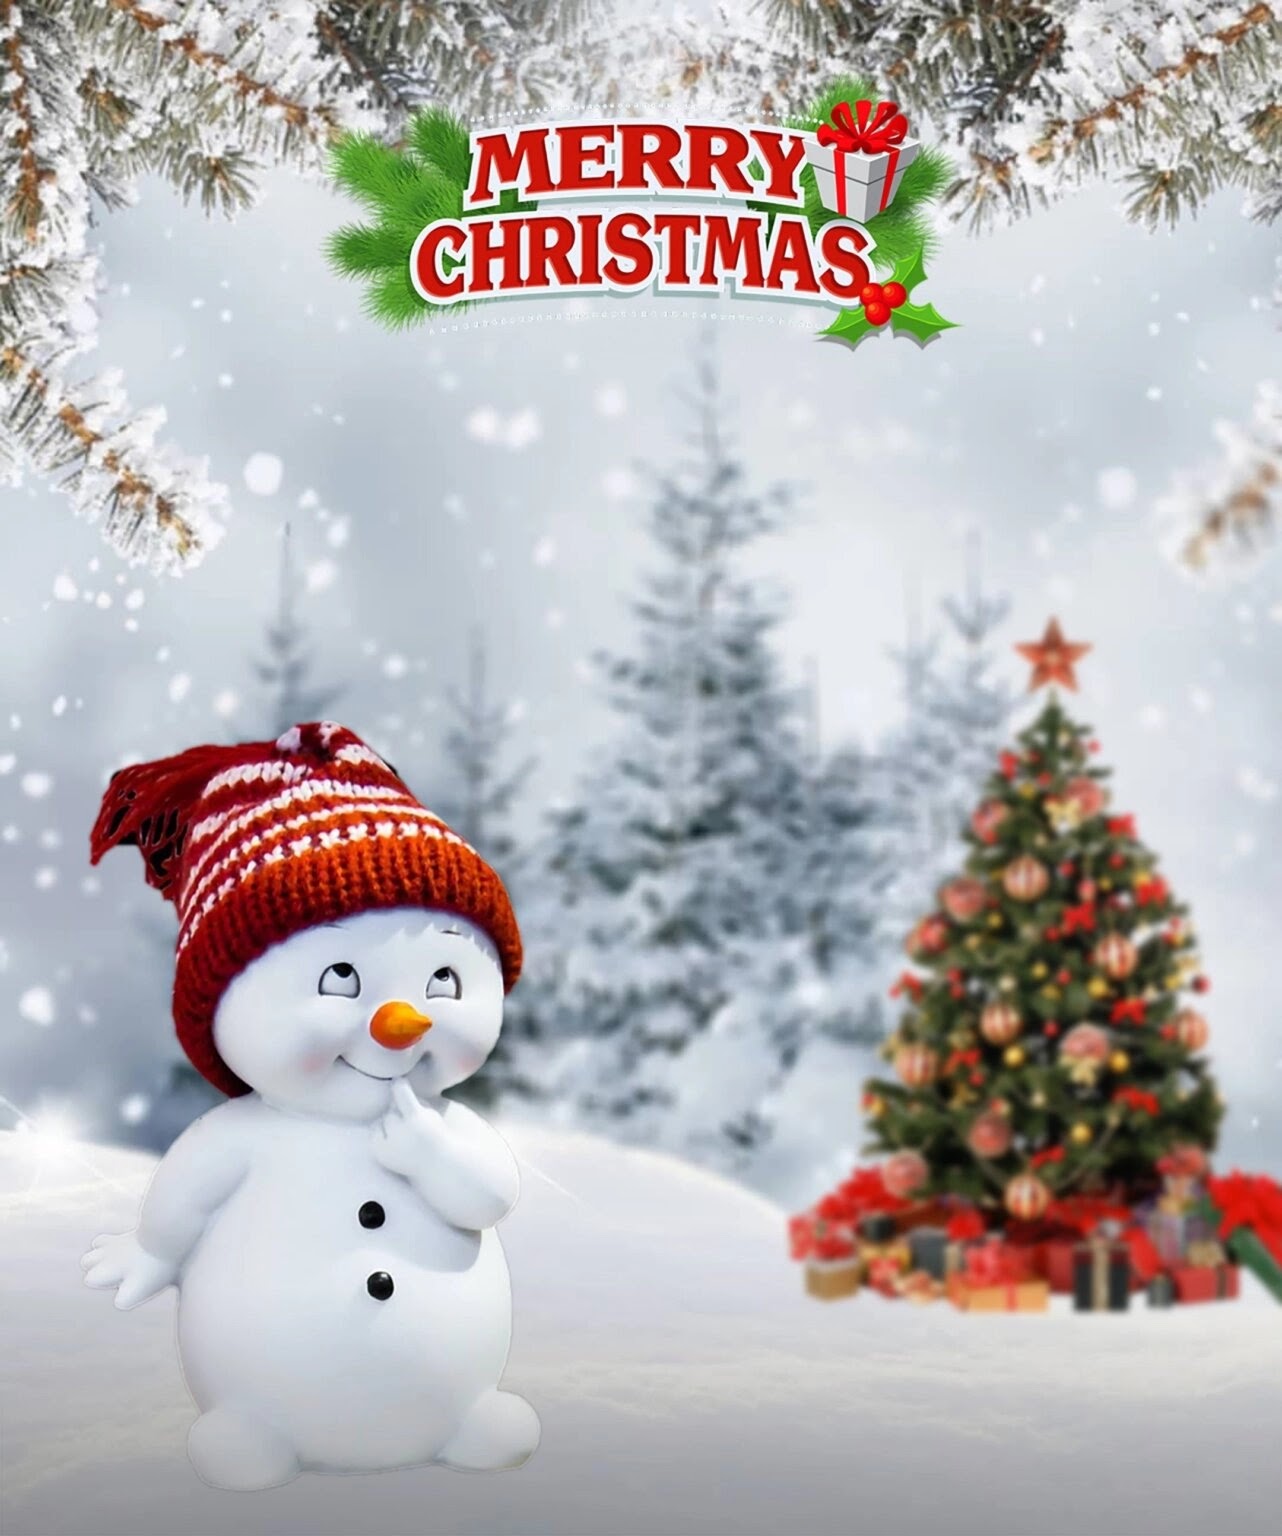 500+ Happy Merry Christmas Editing Background Images Hd for PicsArt 2021-22